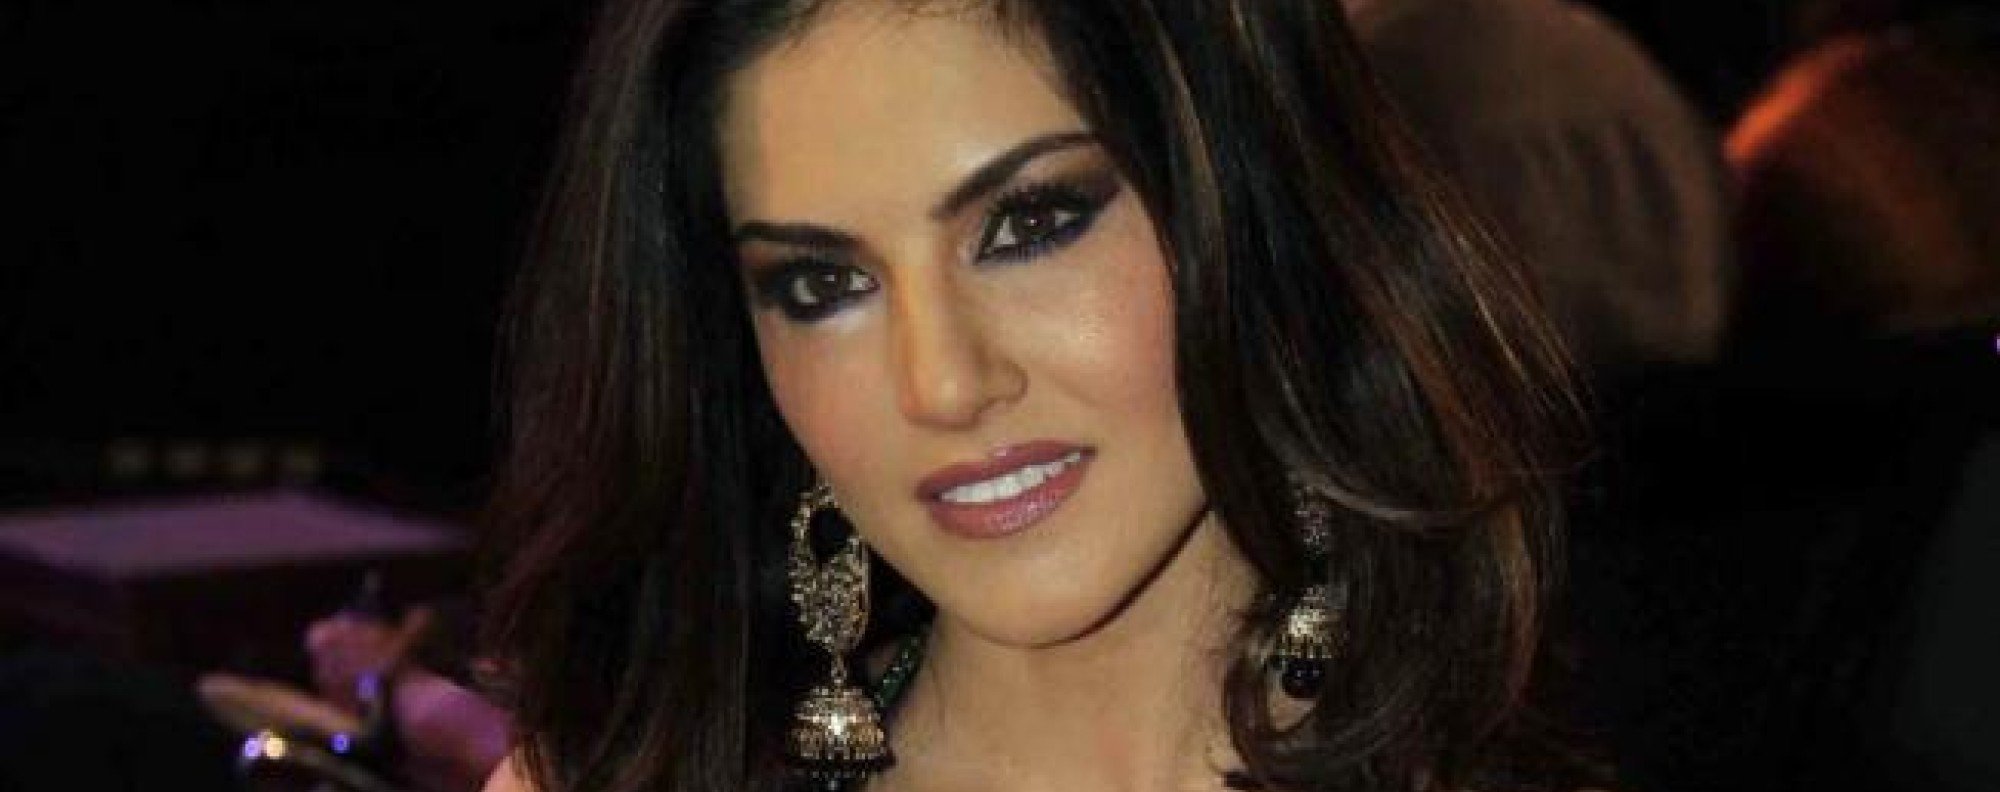 Hot Vidos Xxx Kidnap And Rap - Rape crisis in India leads to calls for porn star Sunny Leone to be jailed  | South China Morning Post